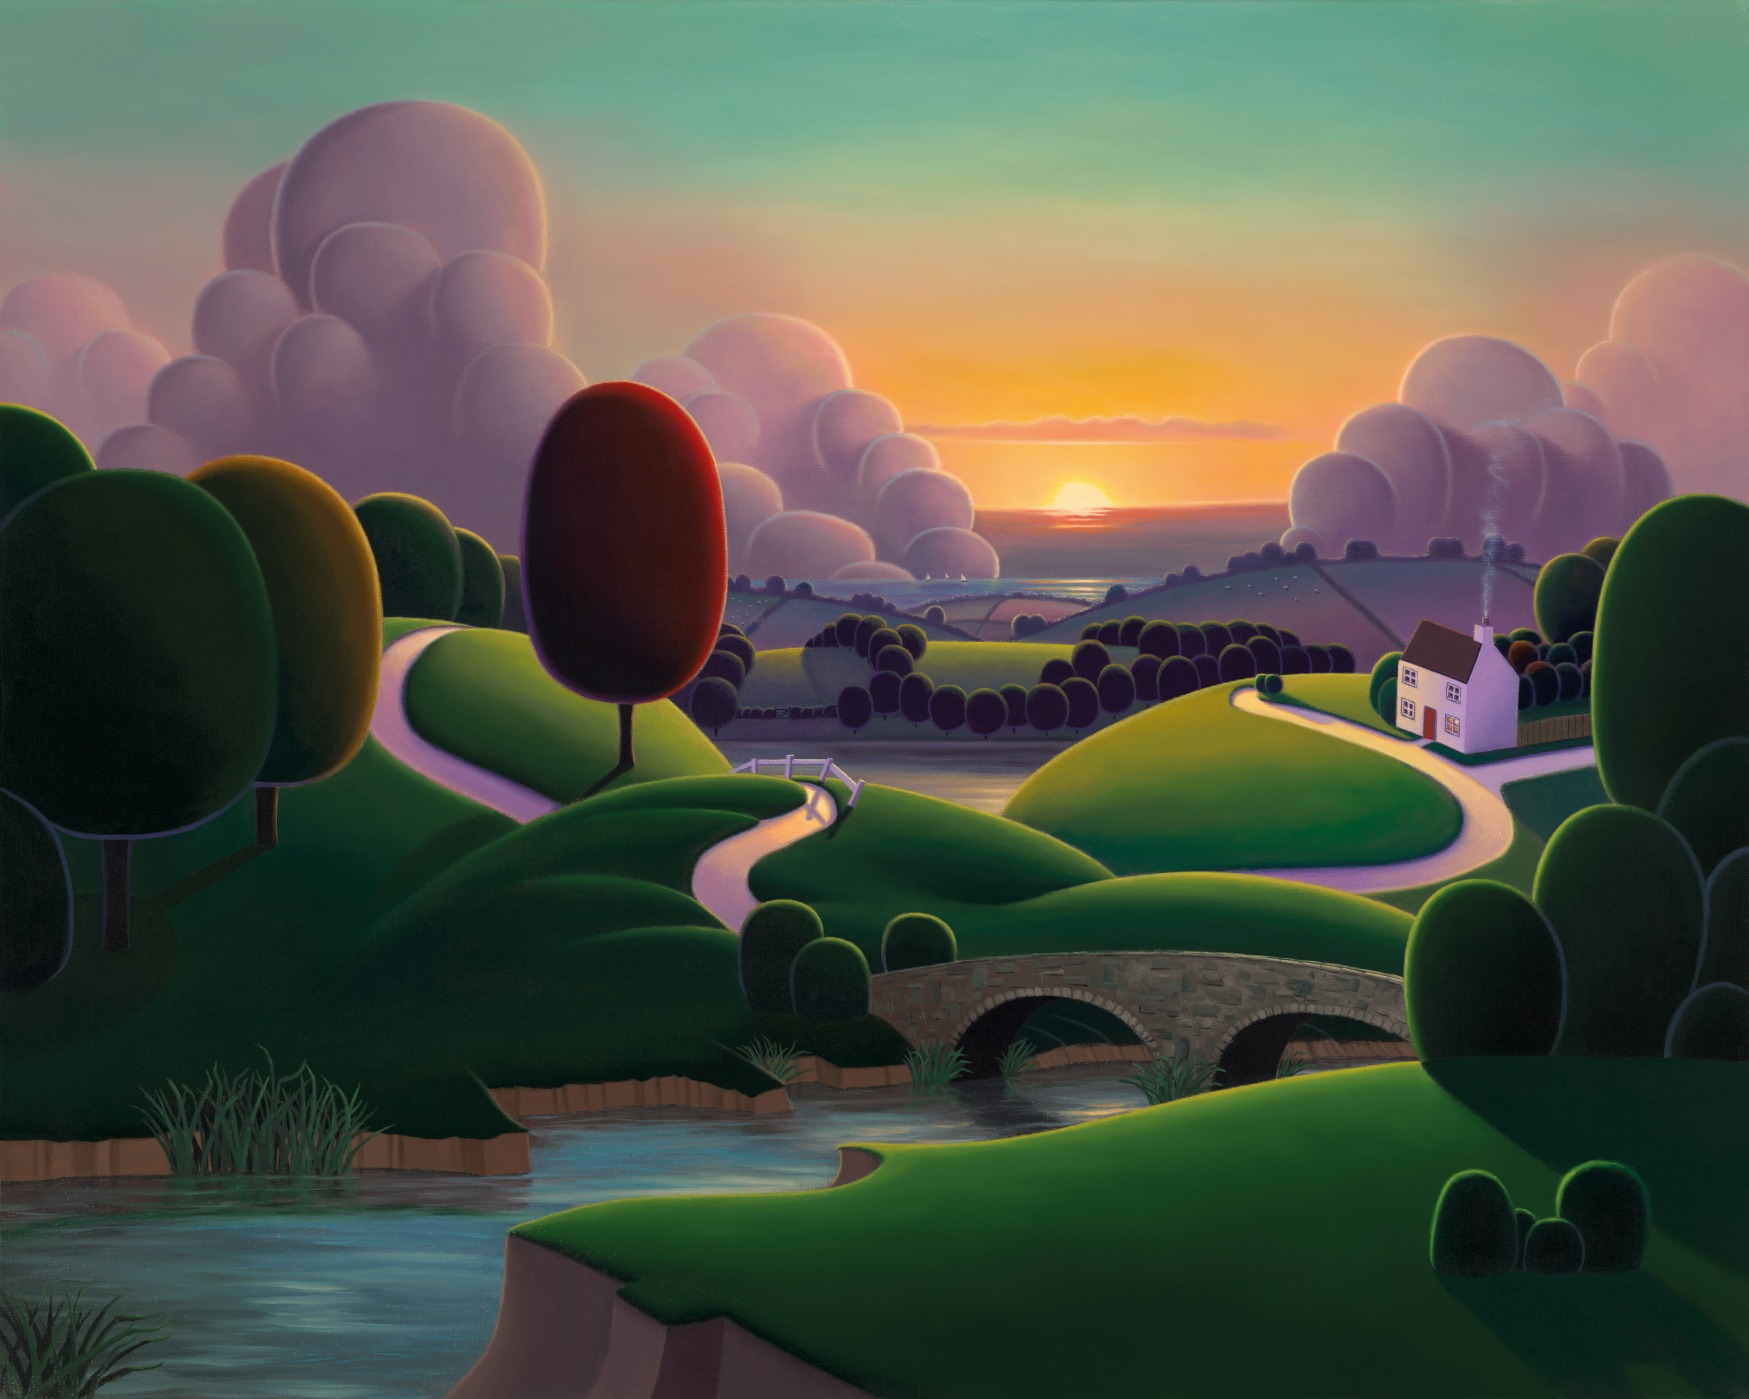 When the River meets the Sea by Paul Corfield, Landscape